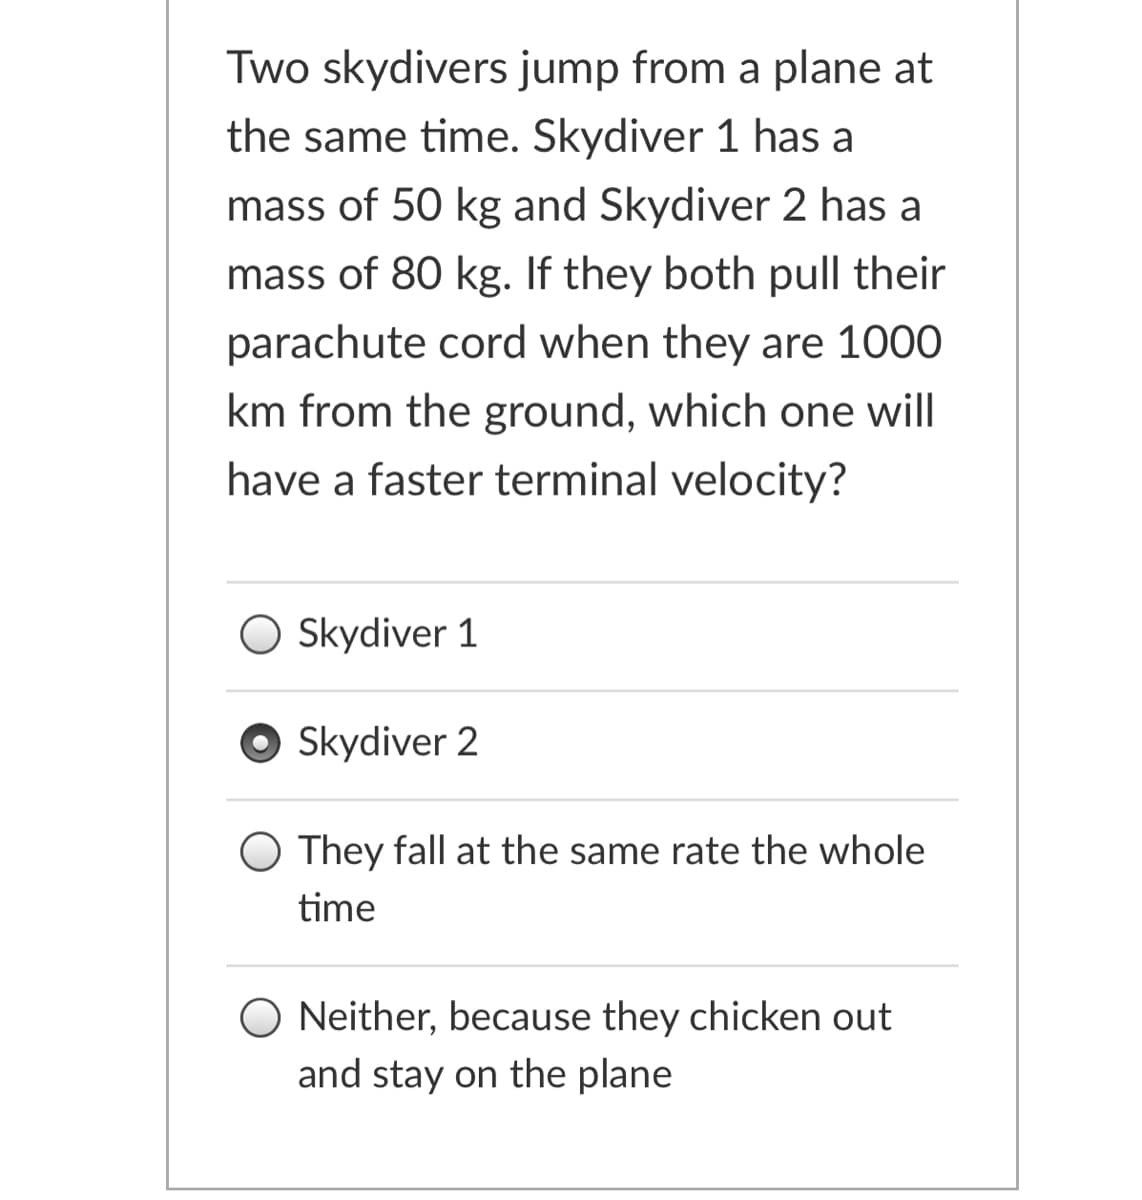 Two skydivers jump from a plane at
the same time. Skydiver 1 has a
mass of 50 kg and Skydiver 2 has a
mass of 80 kg. If they both pull their
parachute cord when they are 1000
km from the ground, which one will
have a faster terminal velocity?
Skydiver 1
Skydiver 2
O They fall at the same rate the whole
time
Neither, because they chicken out
and stay on the plane
